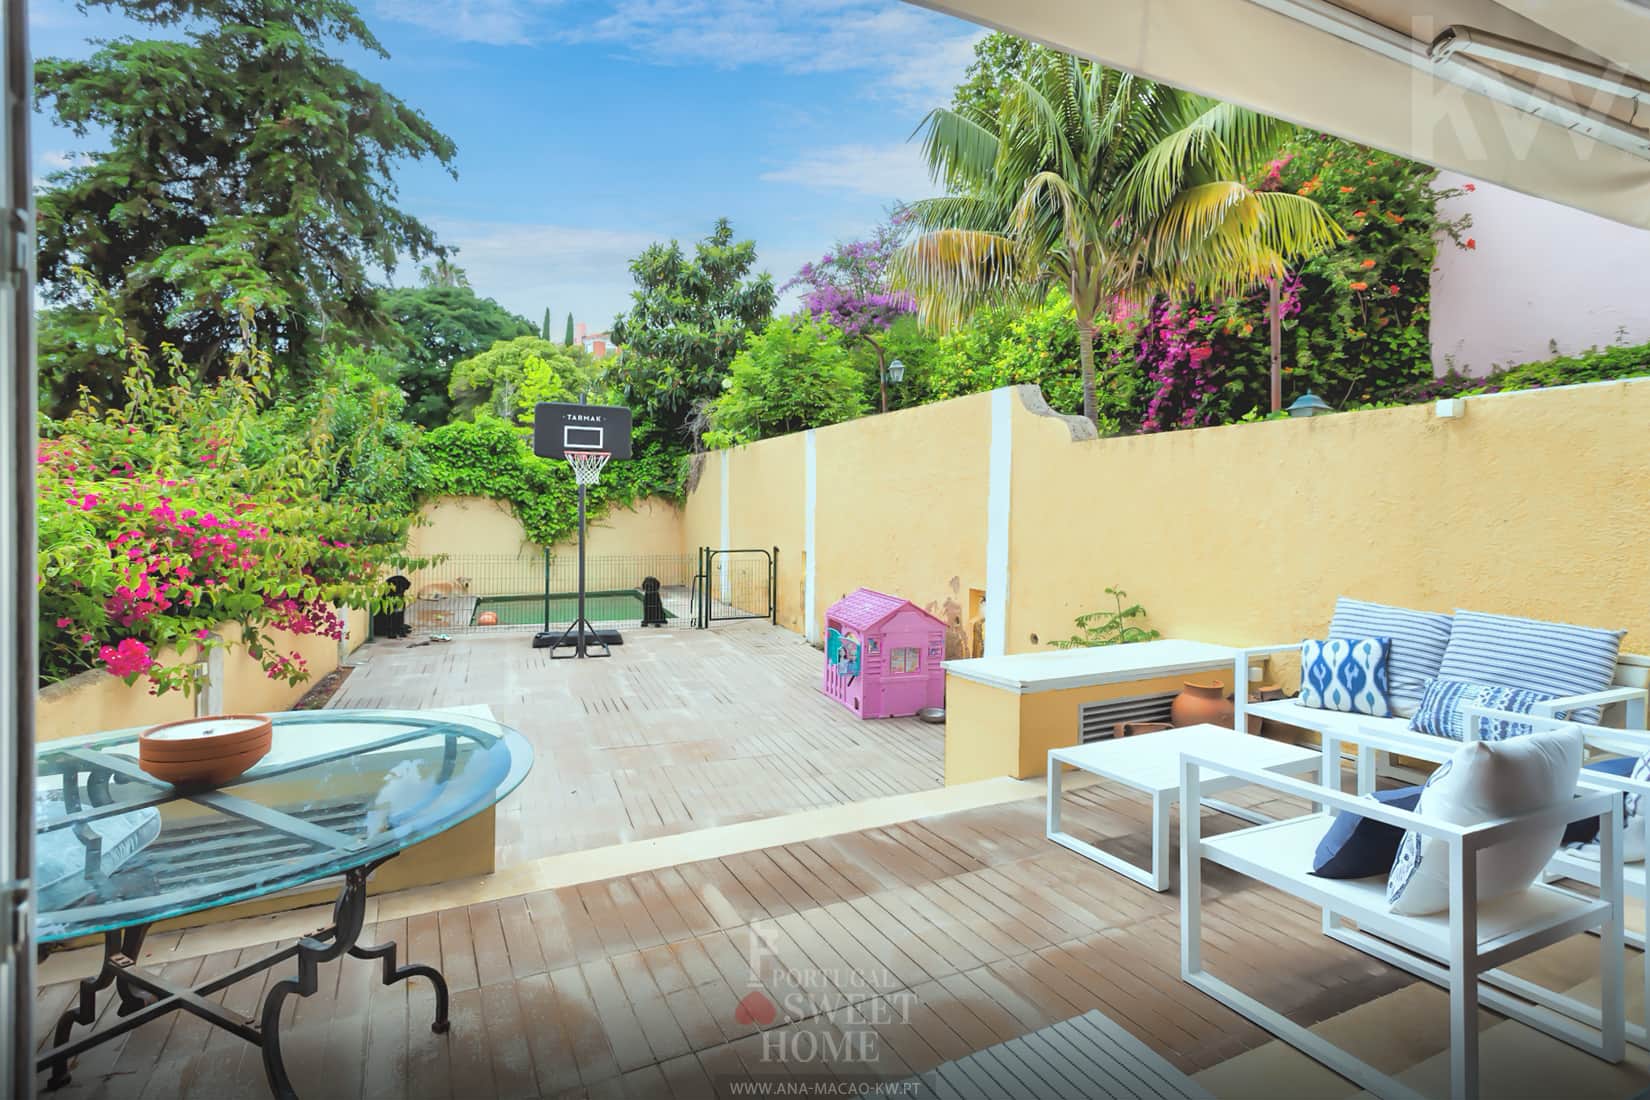 Terrace and patio (84.2 m2) with swimming pool